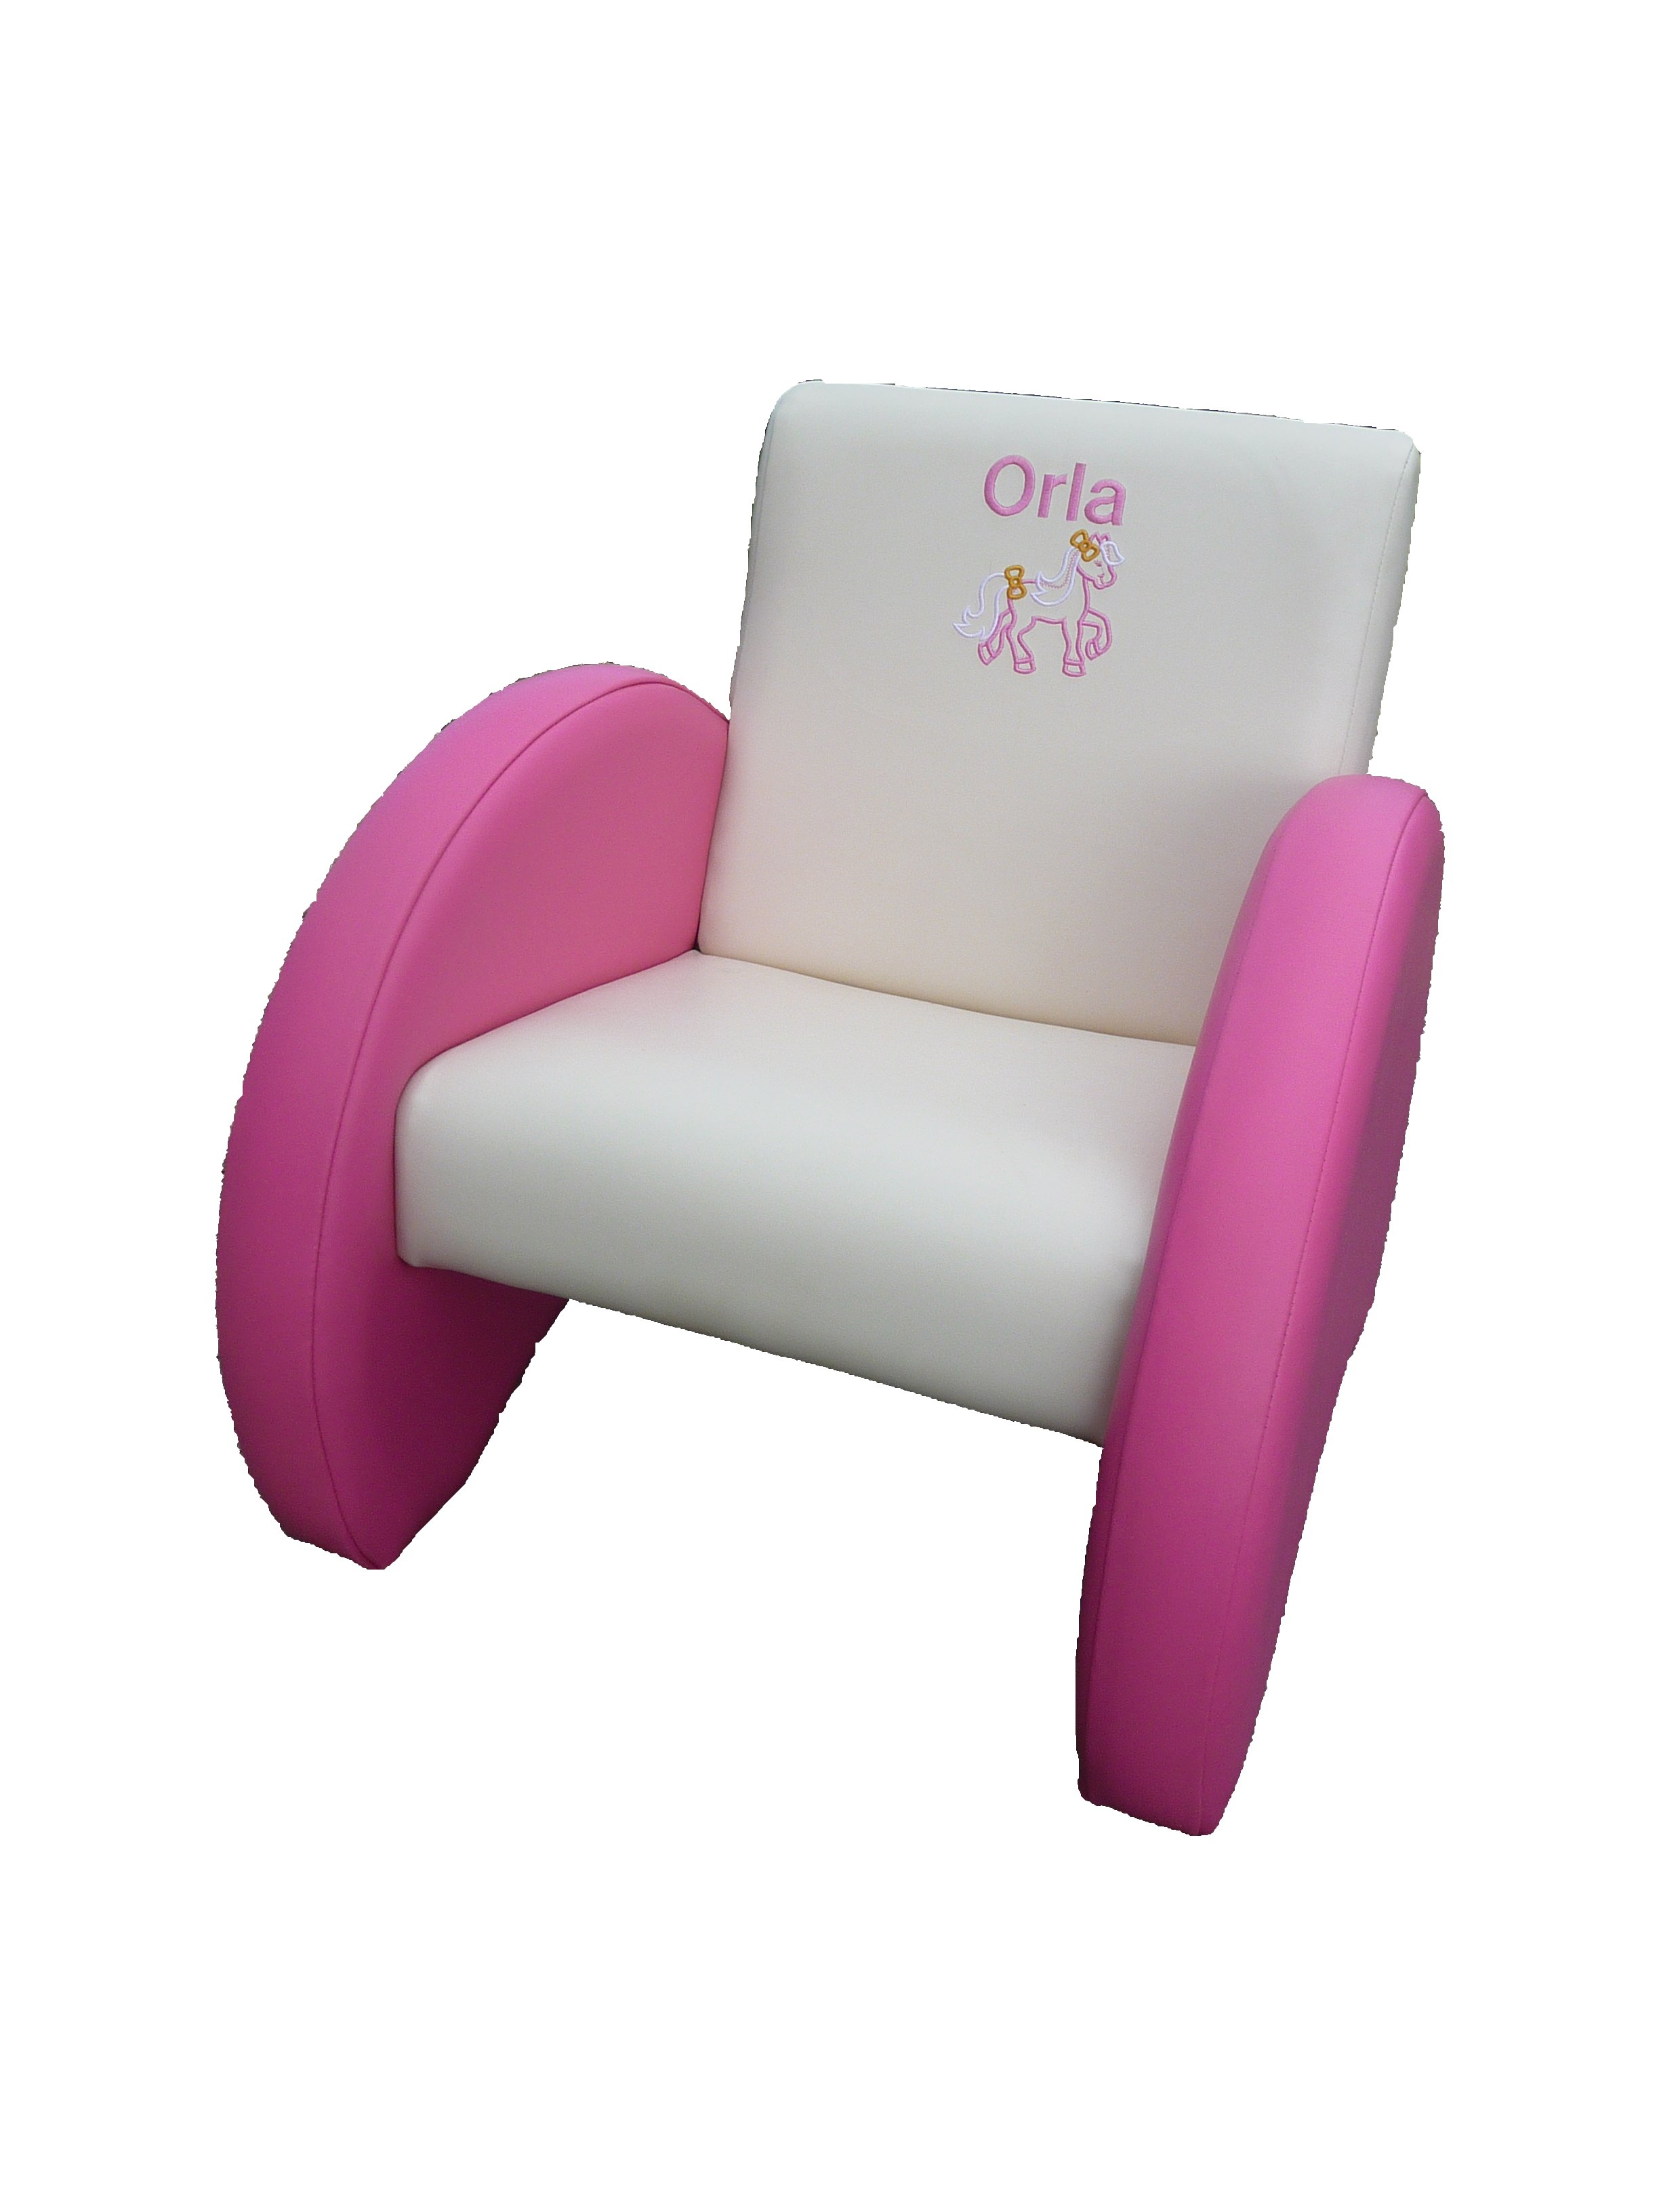 Cream and pink chair with pony